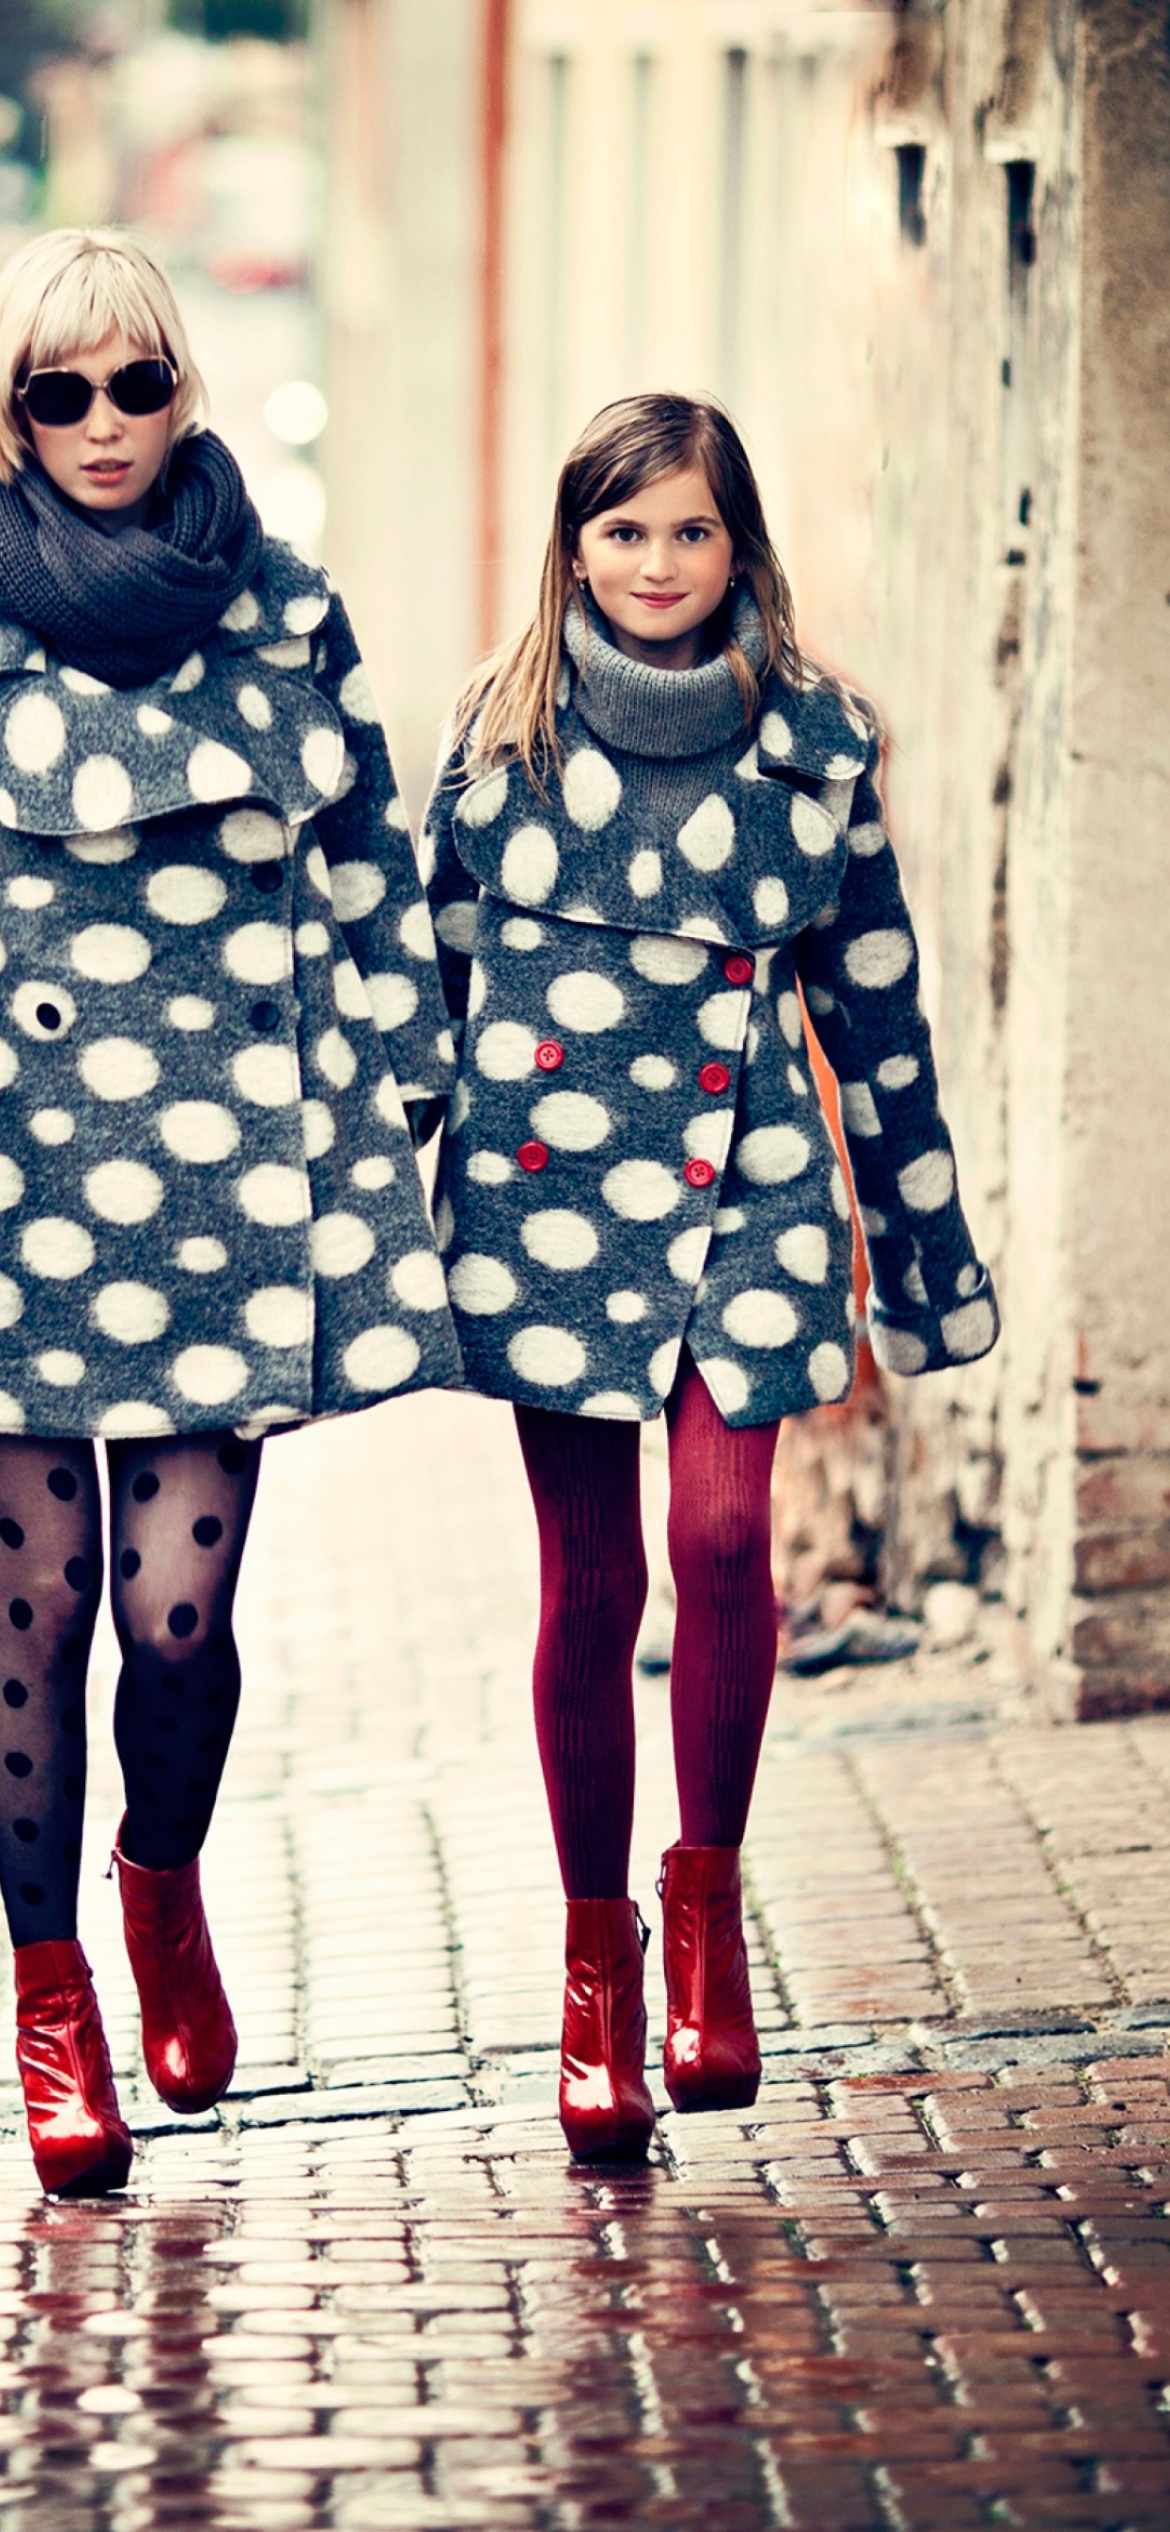 Mother And Daughter In Matching Coats wallpaper 1170x2532